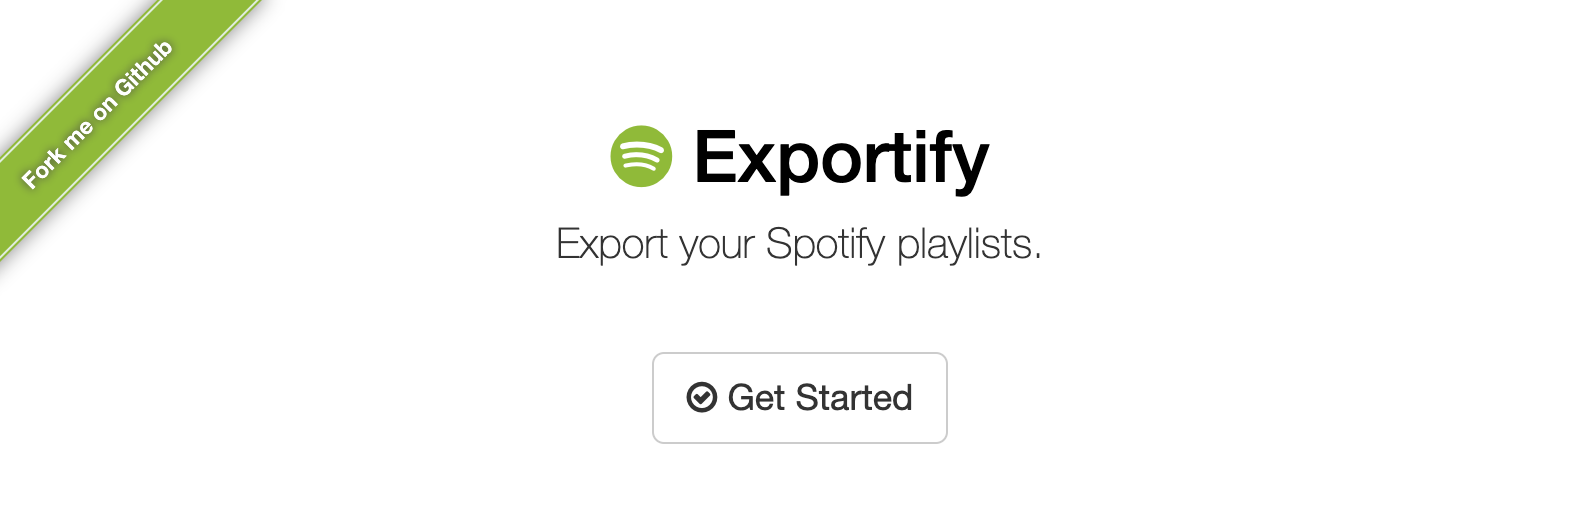 screenshot image of 'exportify' - a web app that turns spotify playlists into csv files